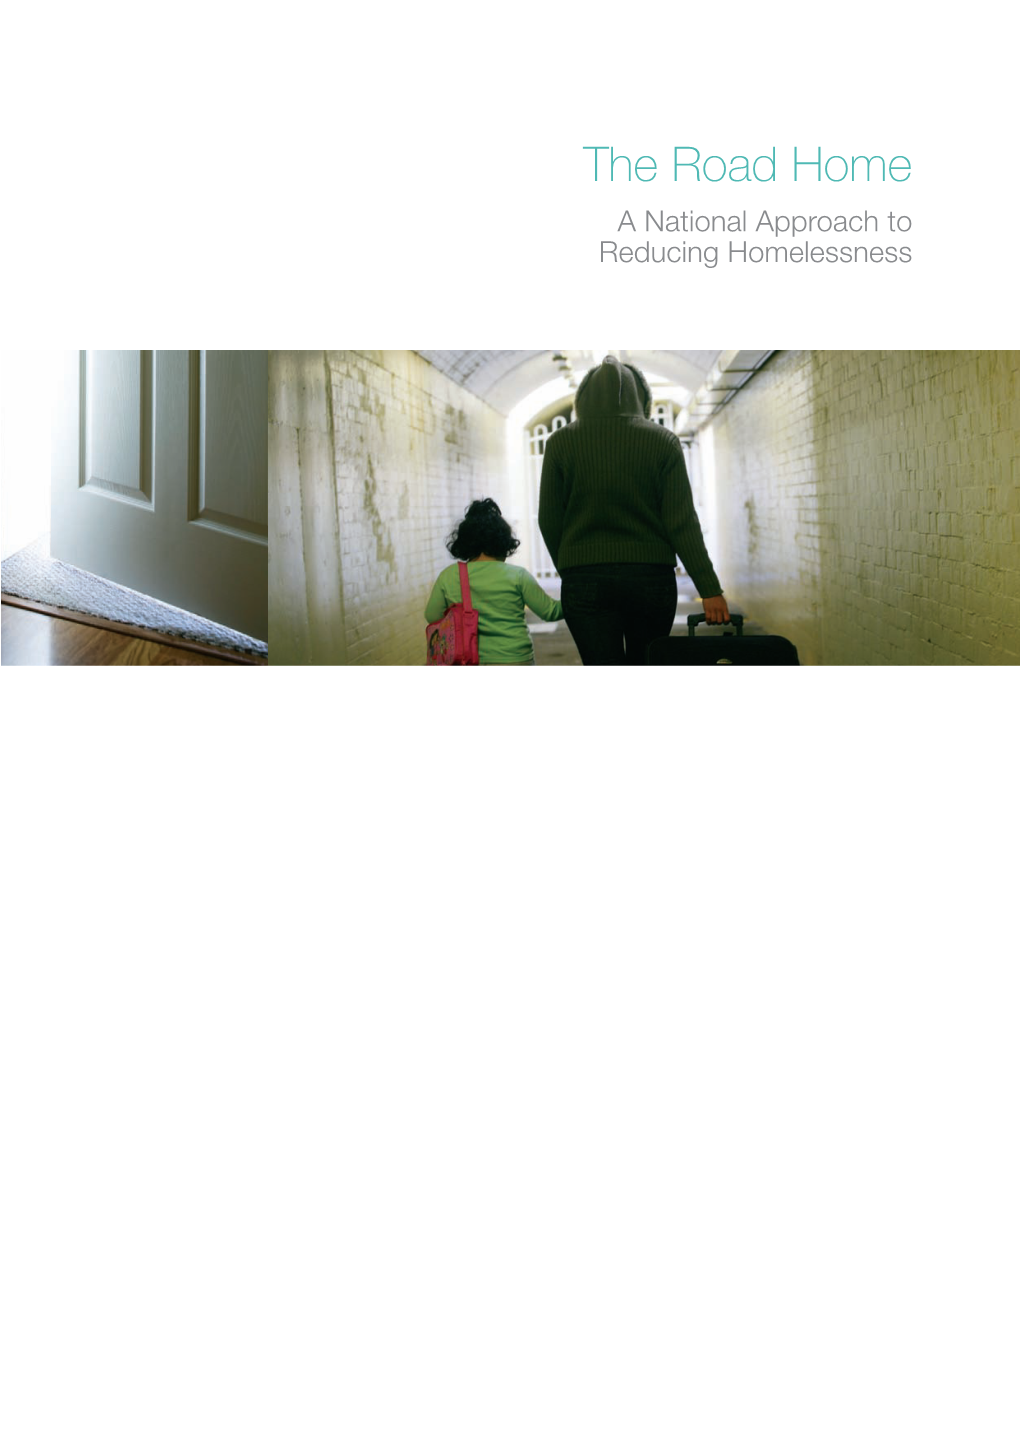 The Road Home a National Approach to Reducing Homelessness © Commonwealth of Australia 2008